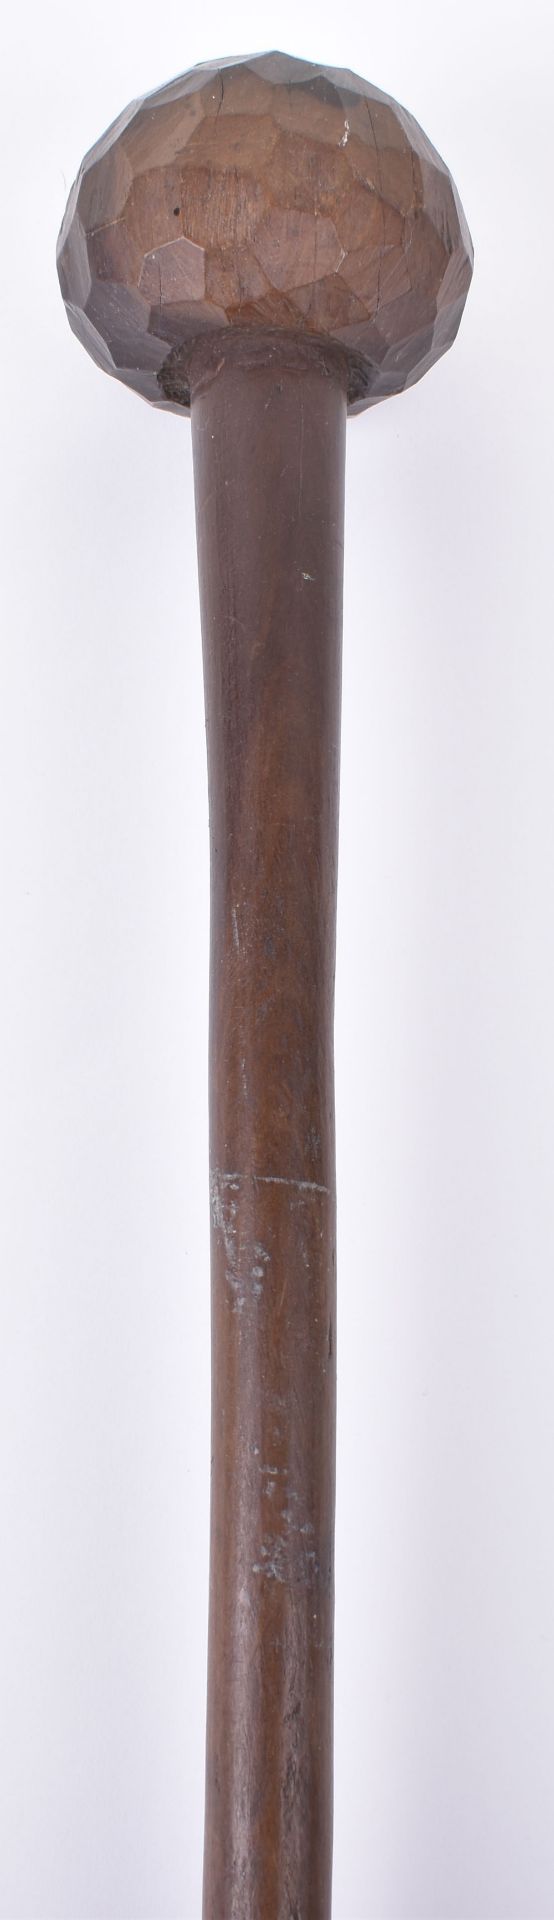 Scarce Zulu Knobkerrie with Concave Facetted Head